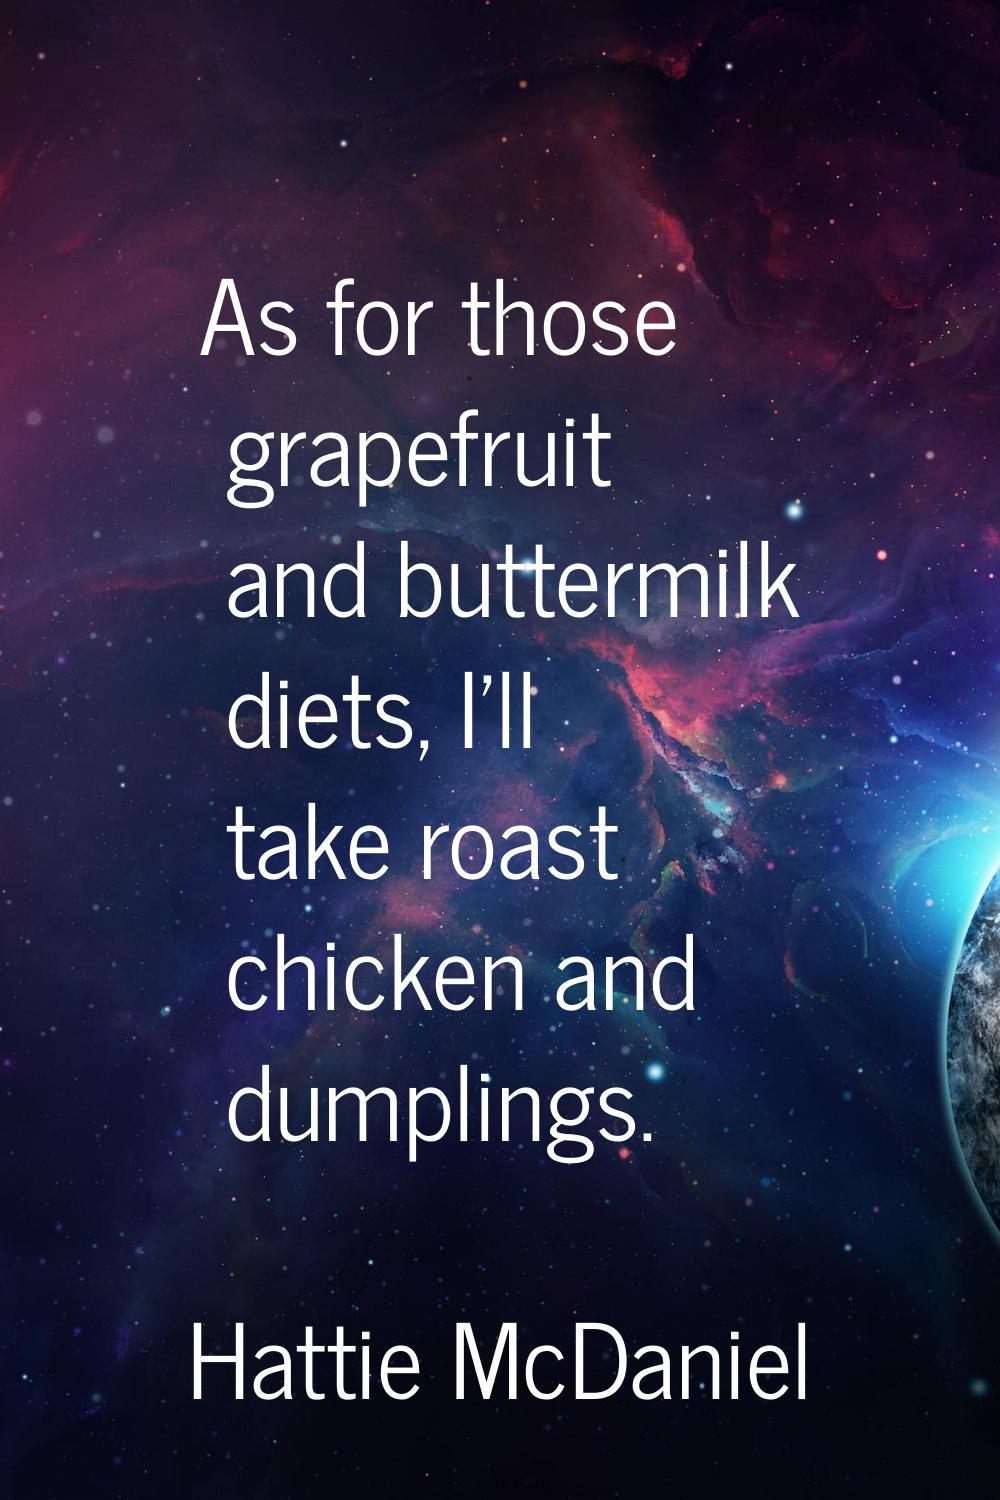 As for those grapefruit and buttermilk diets, I'll take roast chicken and dumplings.